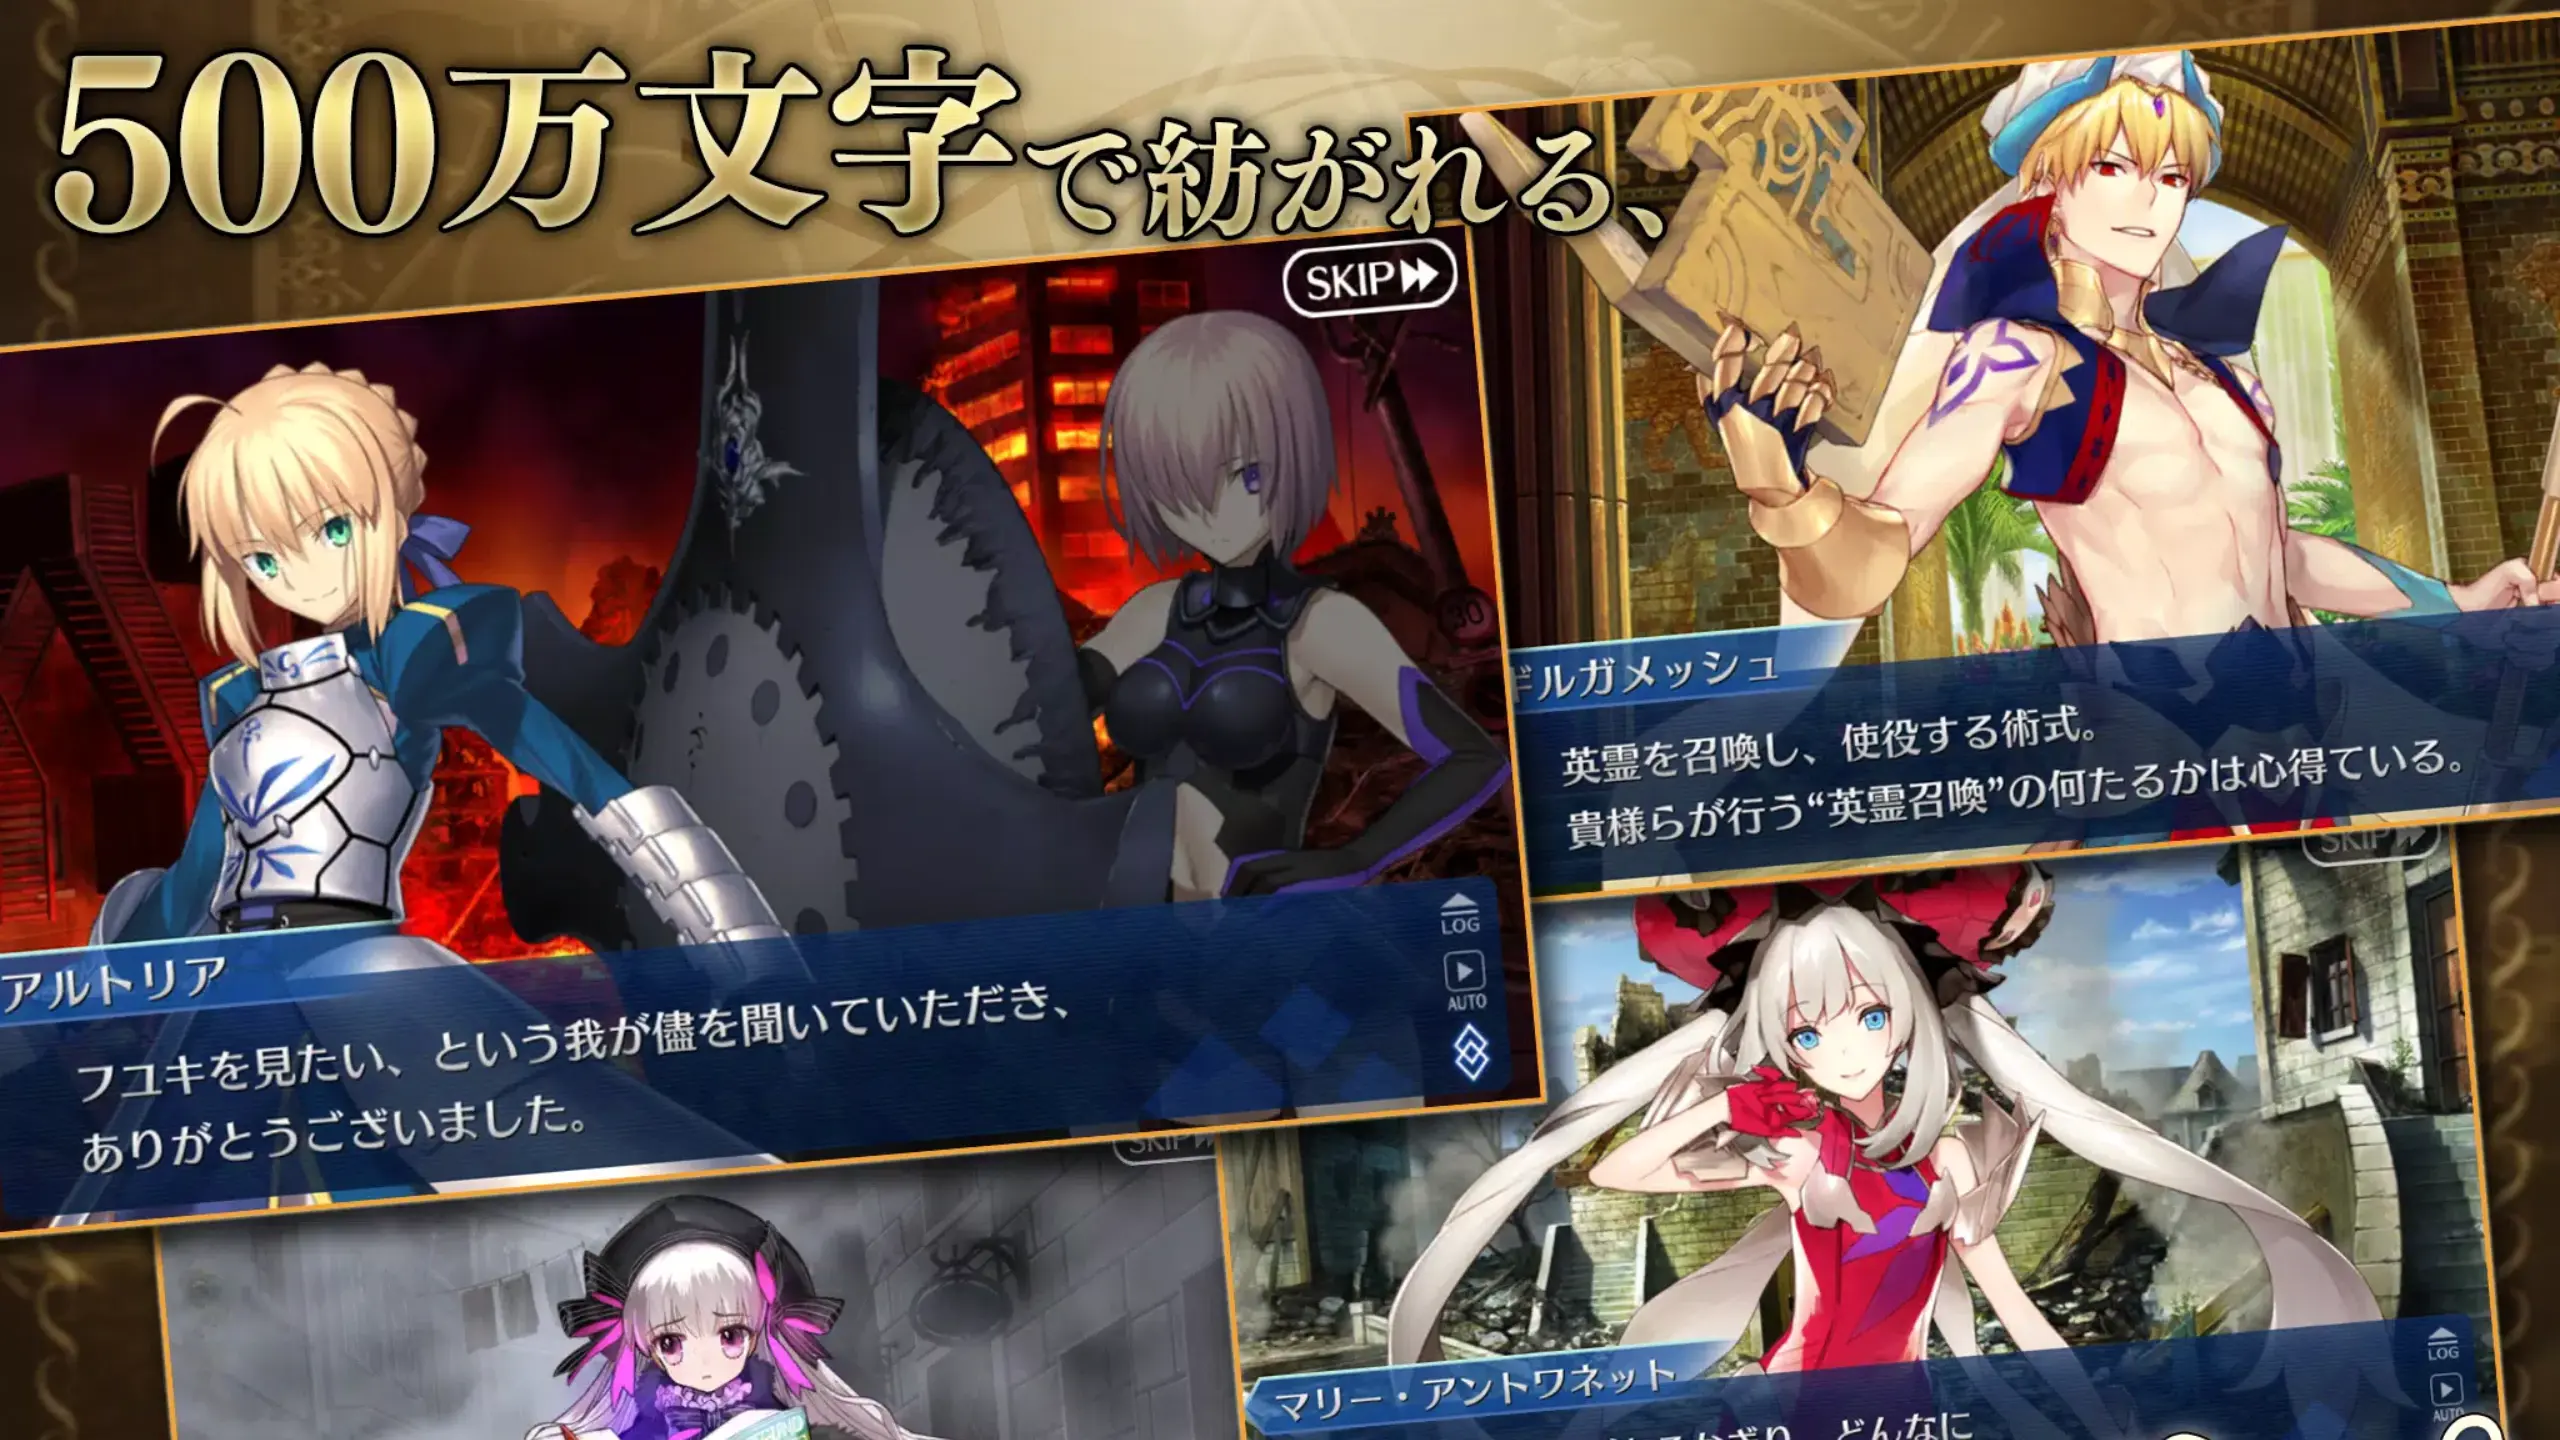 FGO JP Apk The Guide to Download and Install FGO JP Version